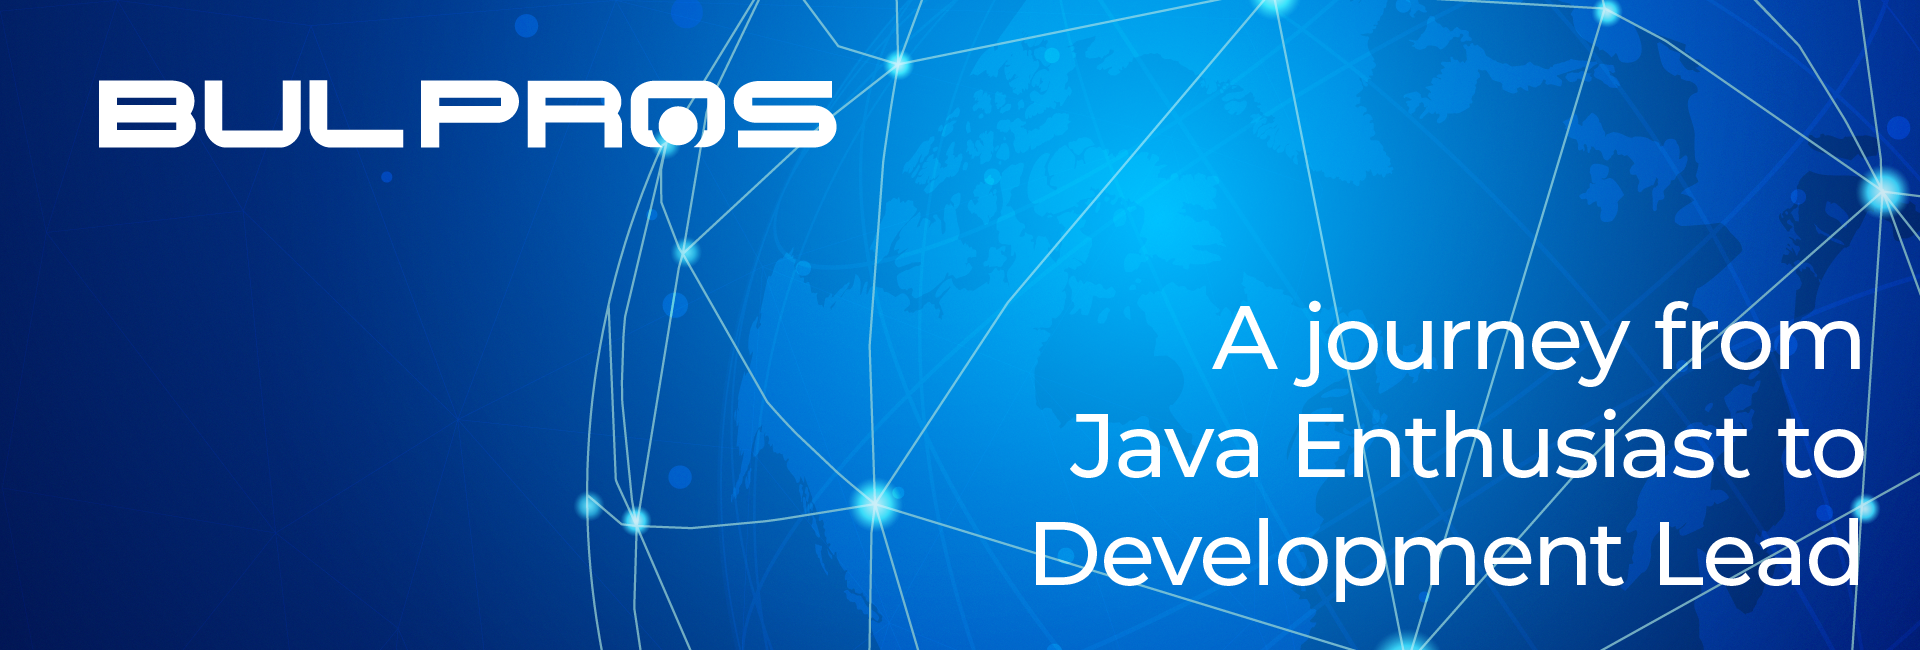 A journey from Java Enthusiast to Development Lead